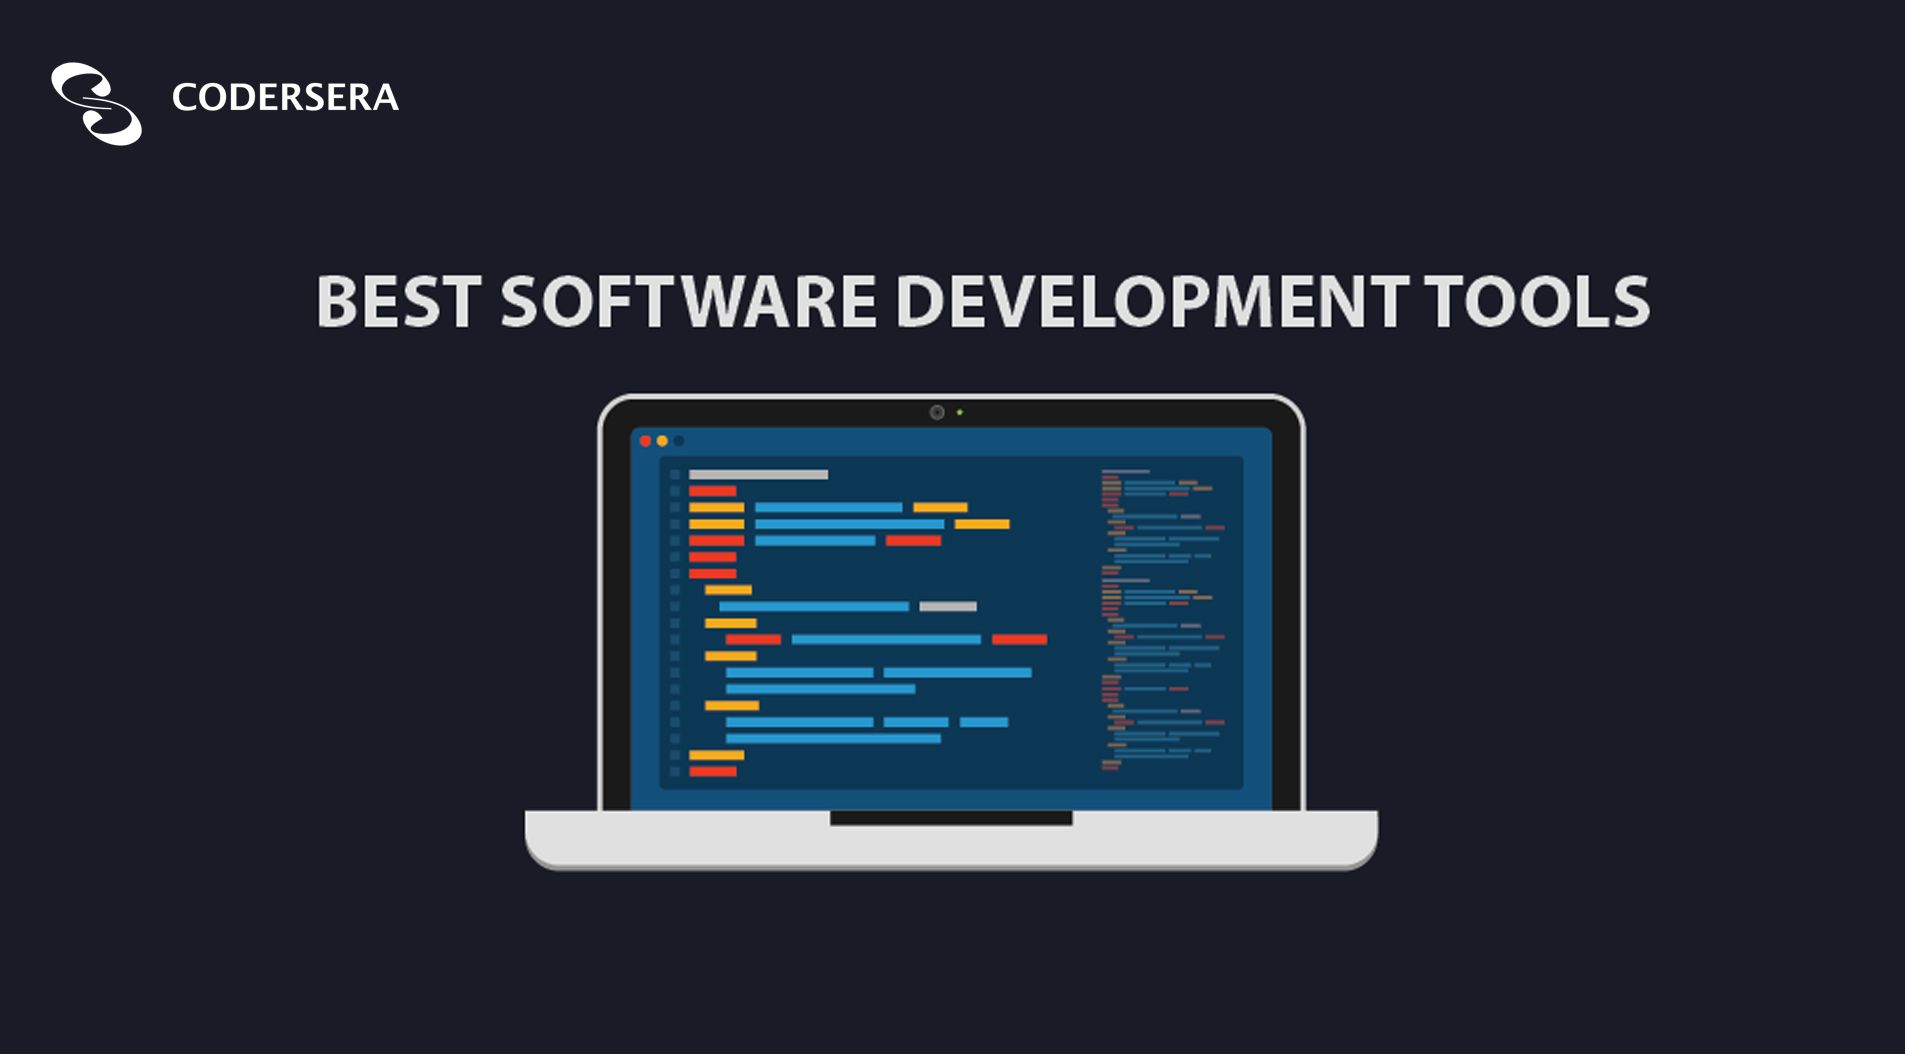 Top 20 Software Development Tools to use in 2021